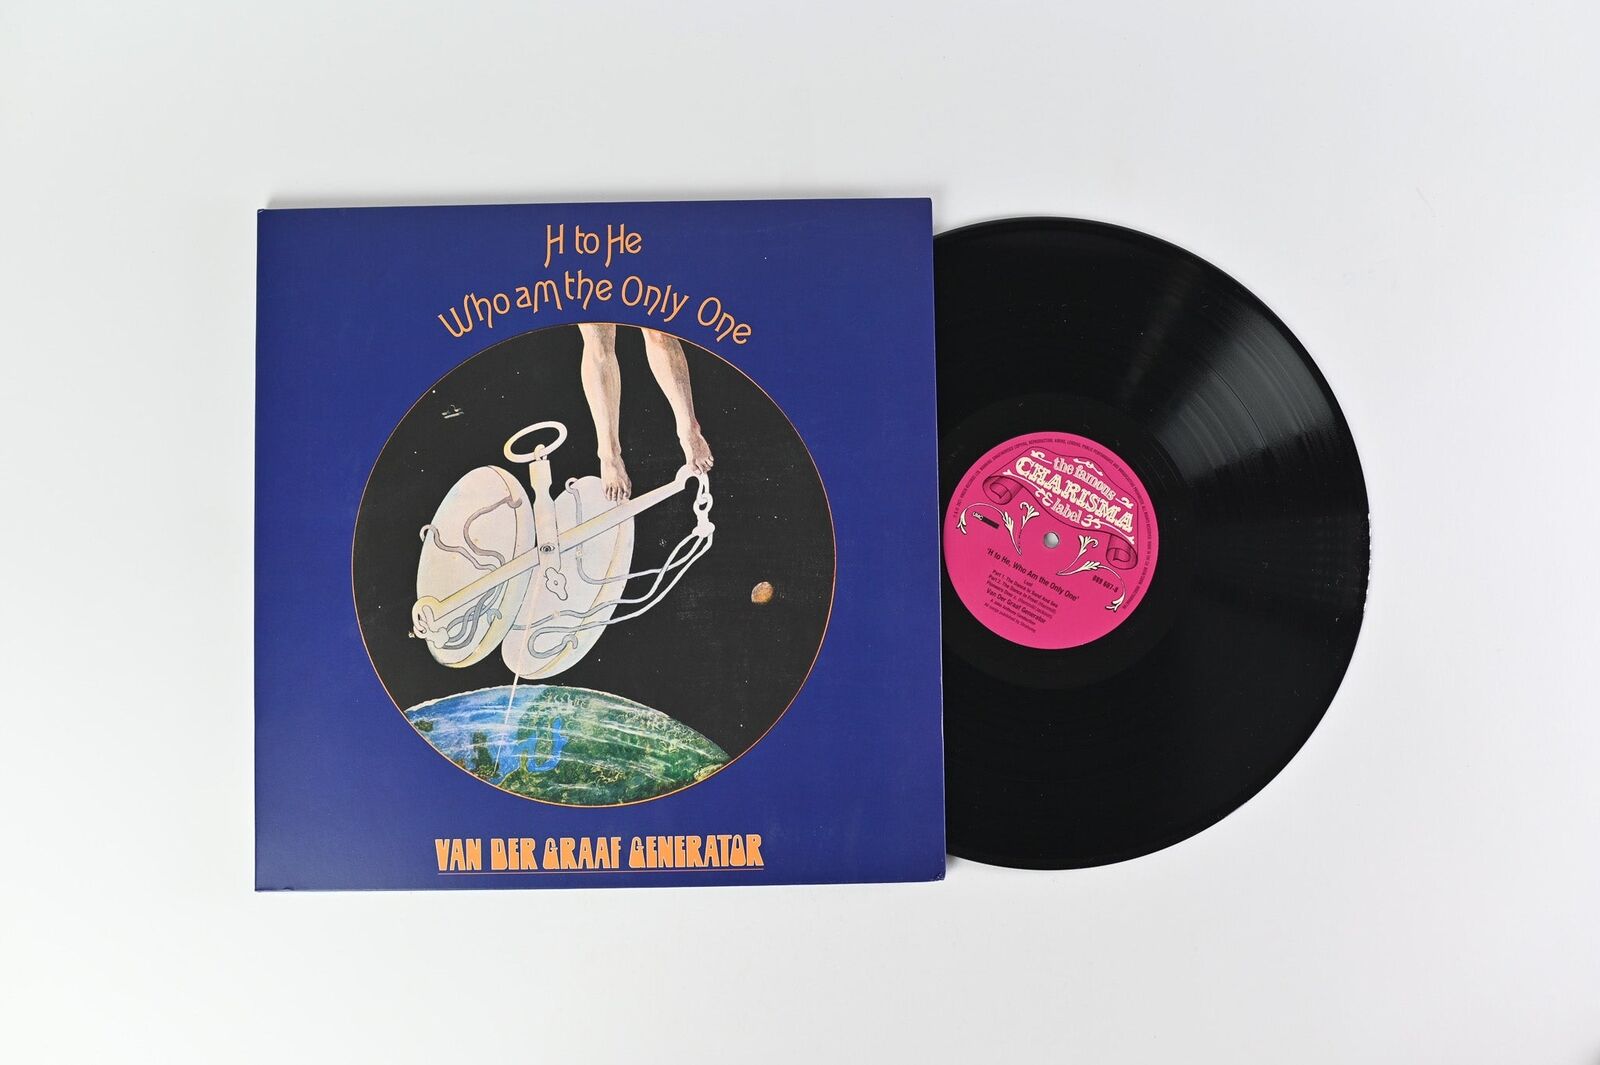 Van Der Graaf Generator - H To He Who Am The Only One Reissue on UMC/Charisma